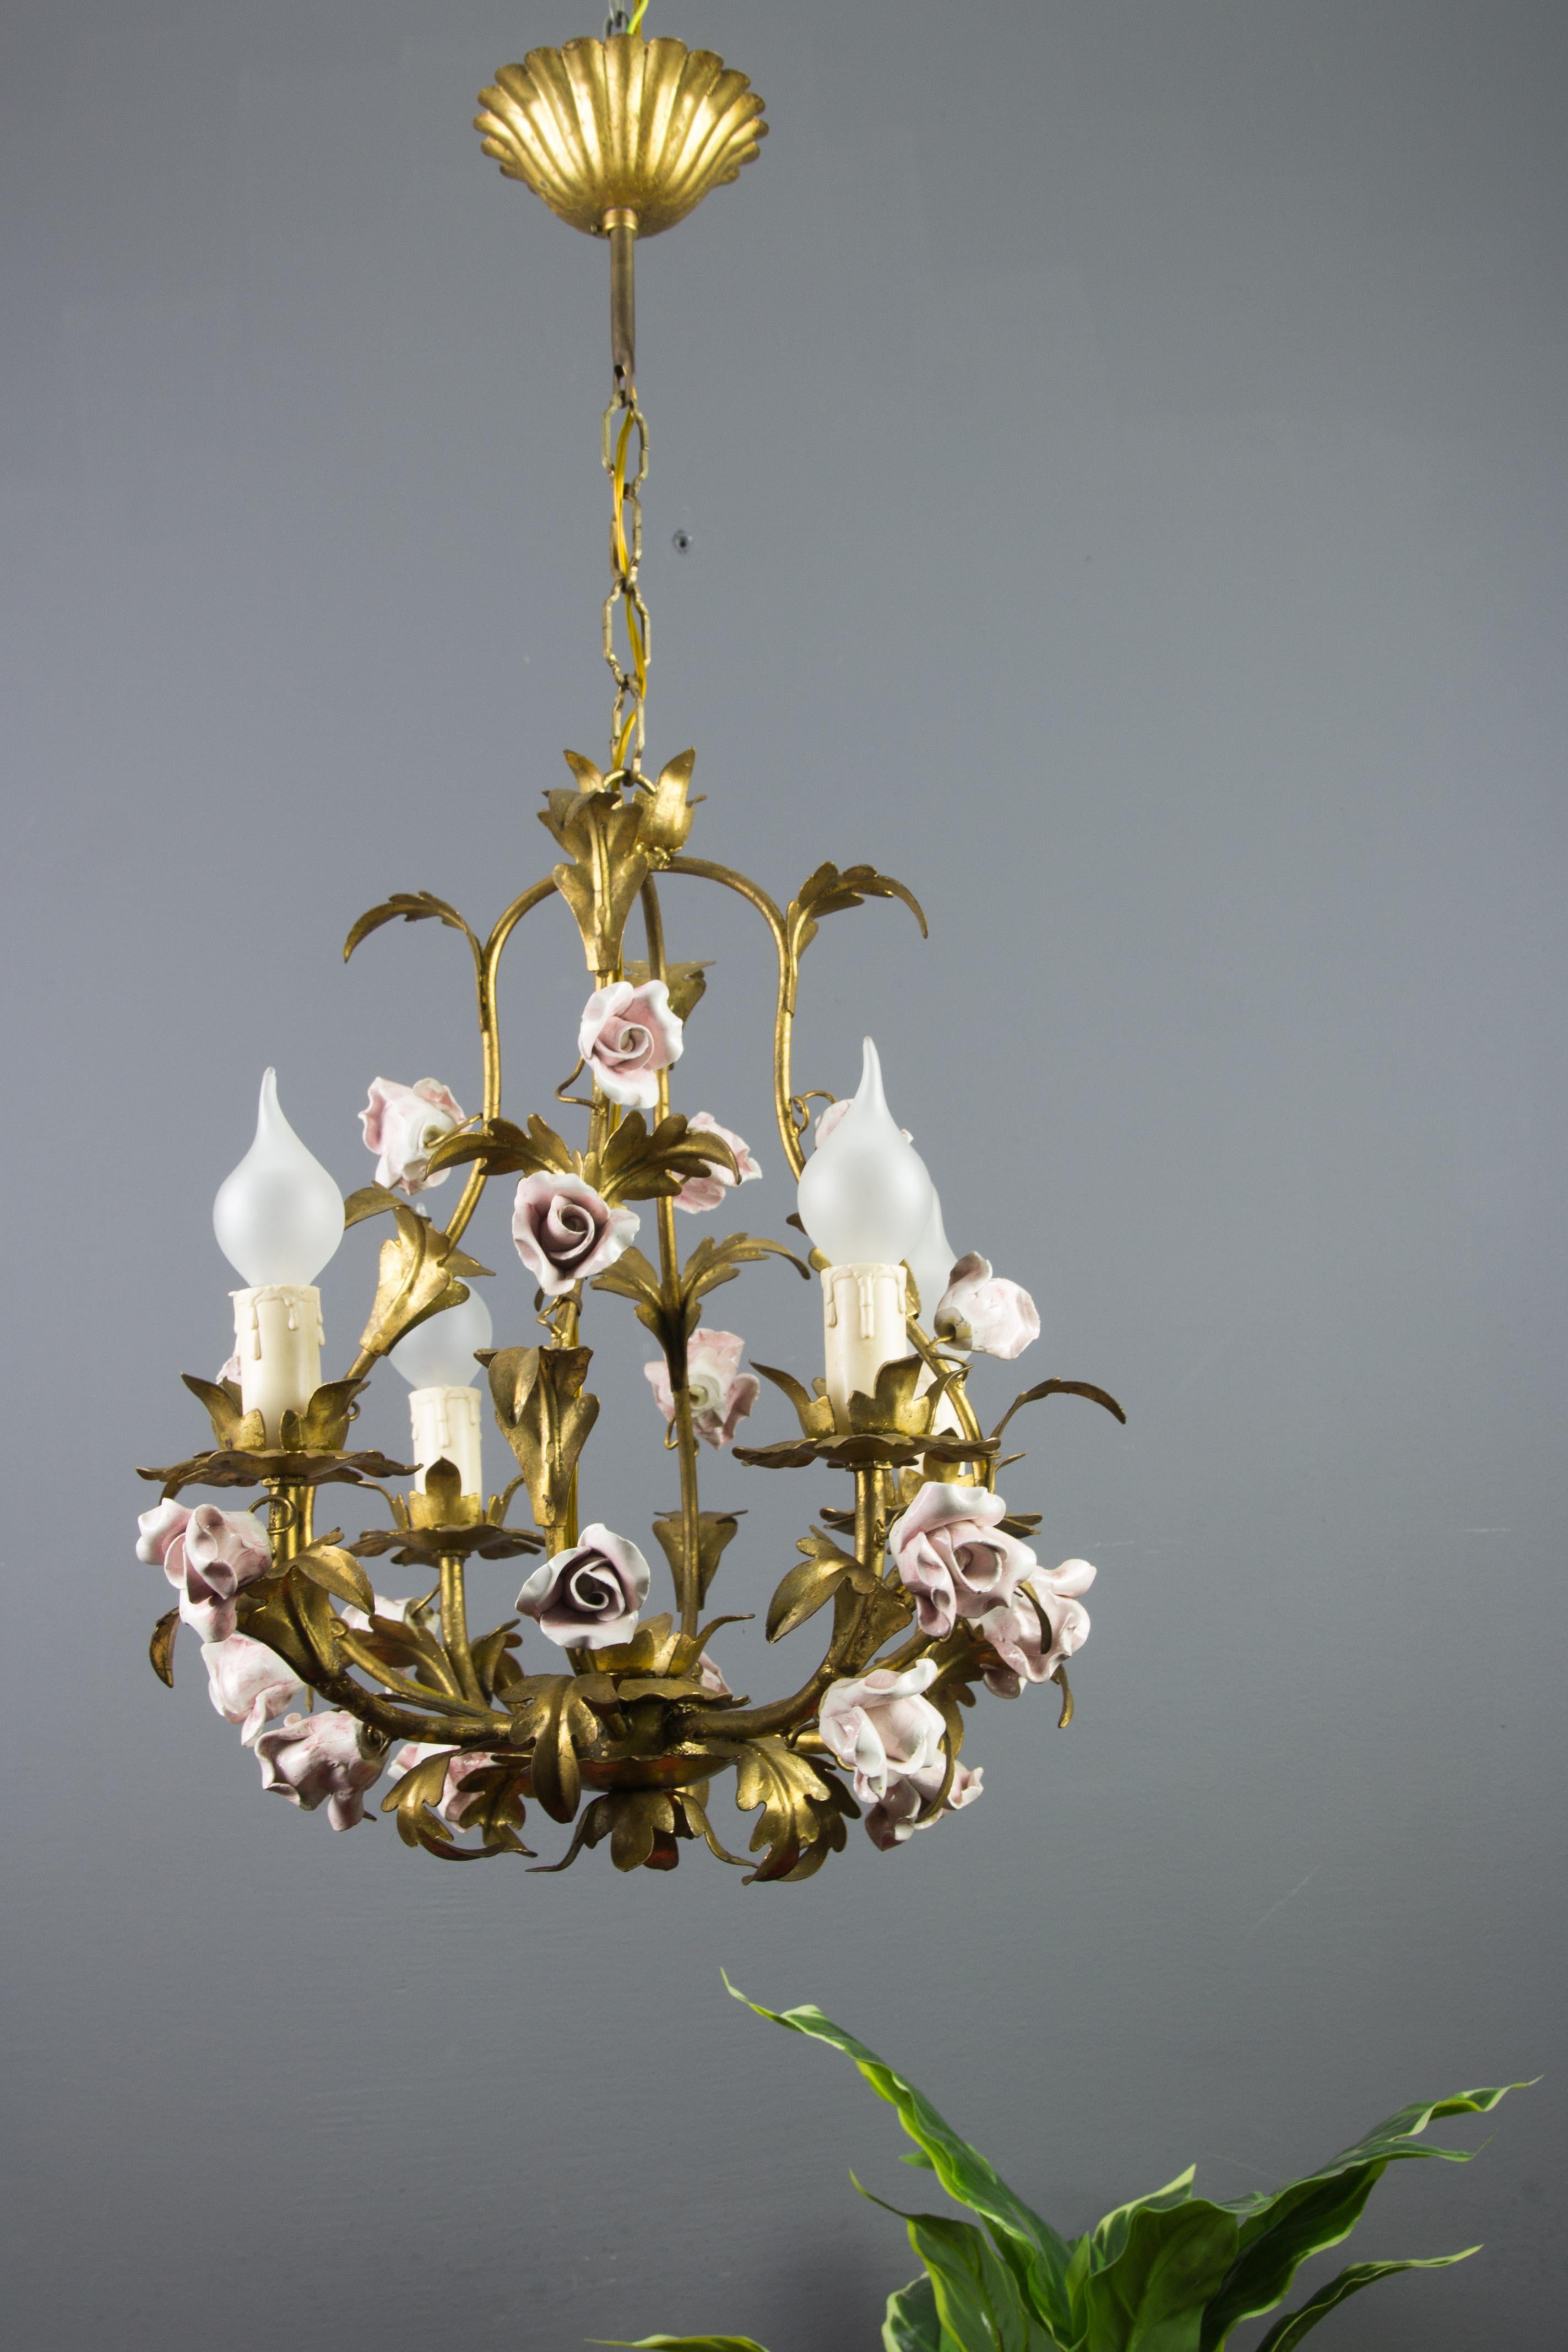 Mid-20th Century Italian Florentine Birdcage Gold Color Tôle Chandelier with Pink Ceramic Roses